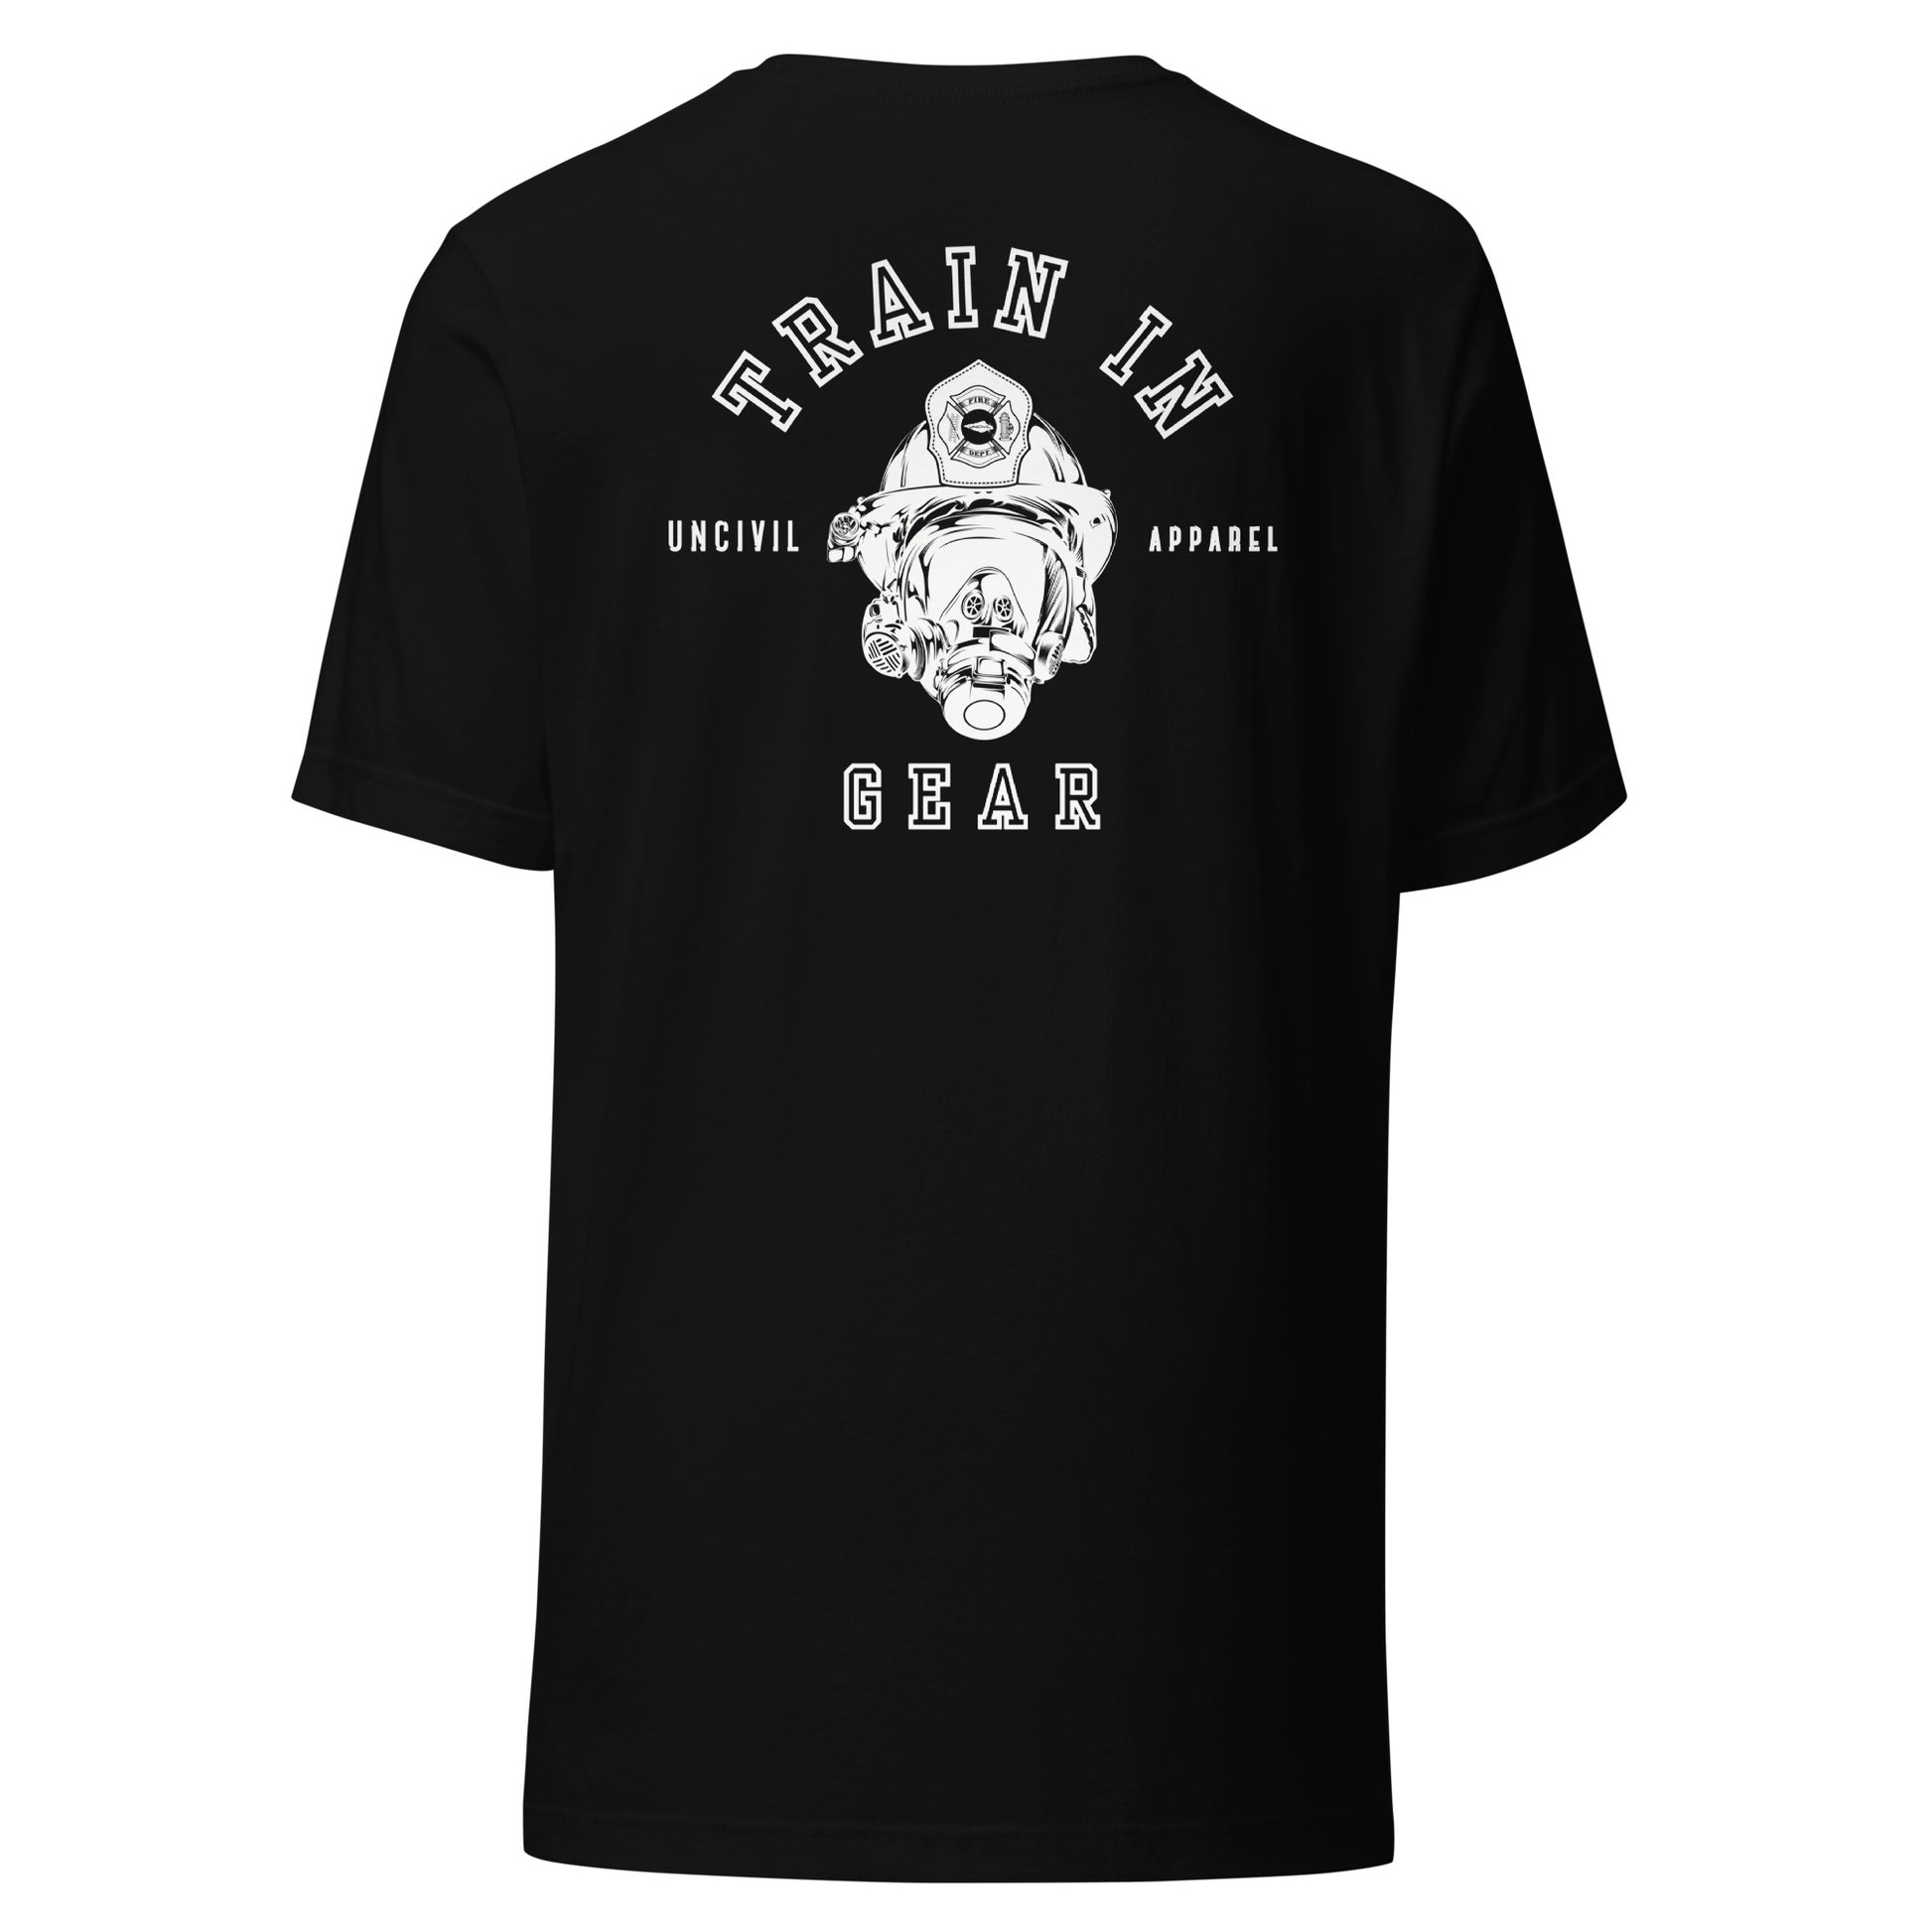 Train in Gear Graphic T-shirt, Firefighter and Military shirts, Black